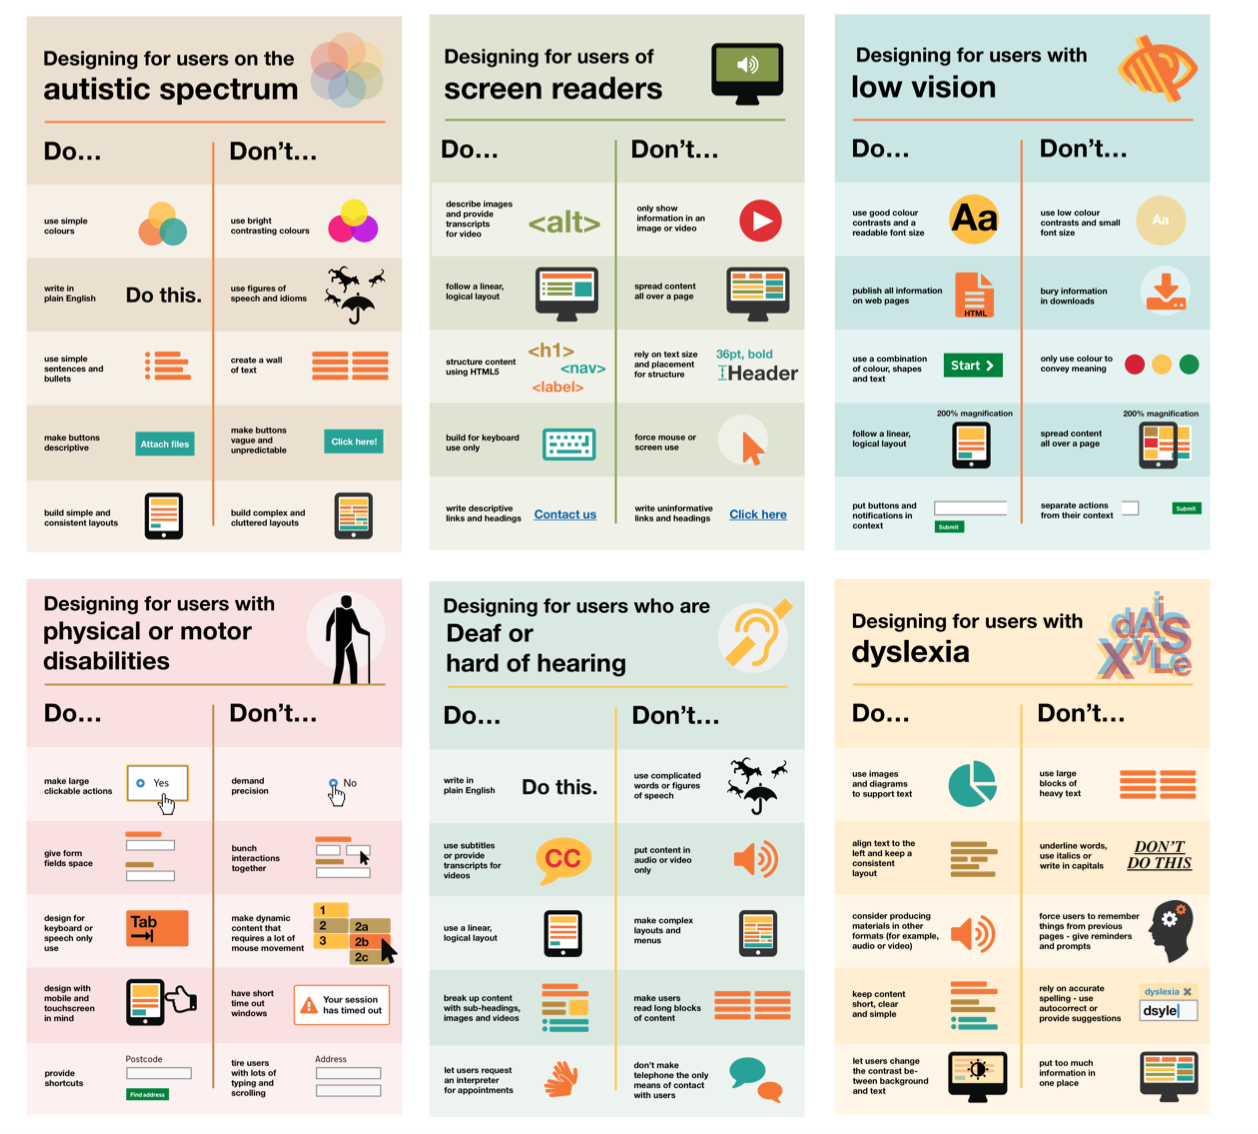 Thumbnail views of example posters including designing for users on the autistic spectrum, for users of screen readers and for users with low vision